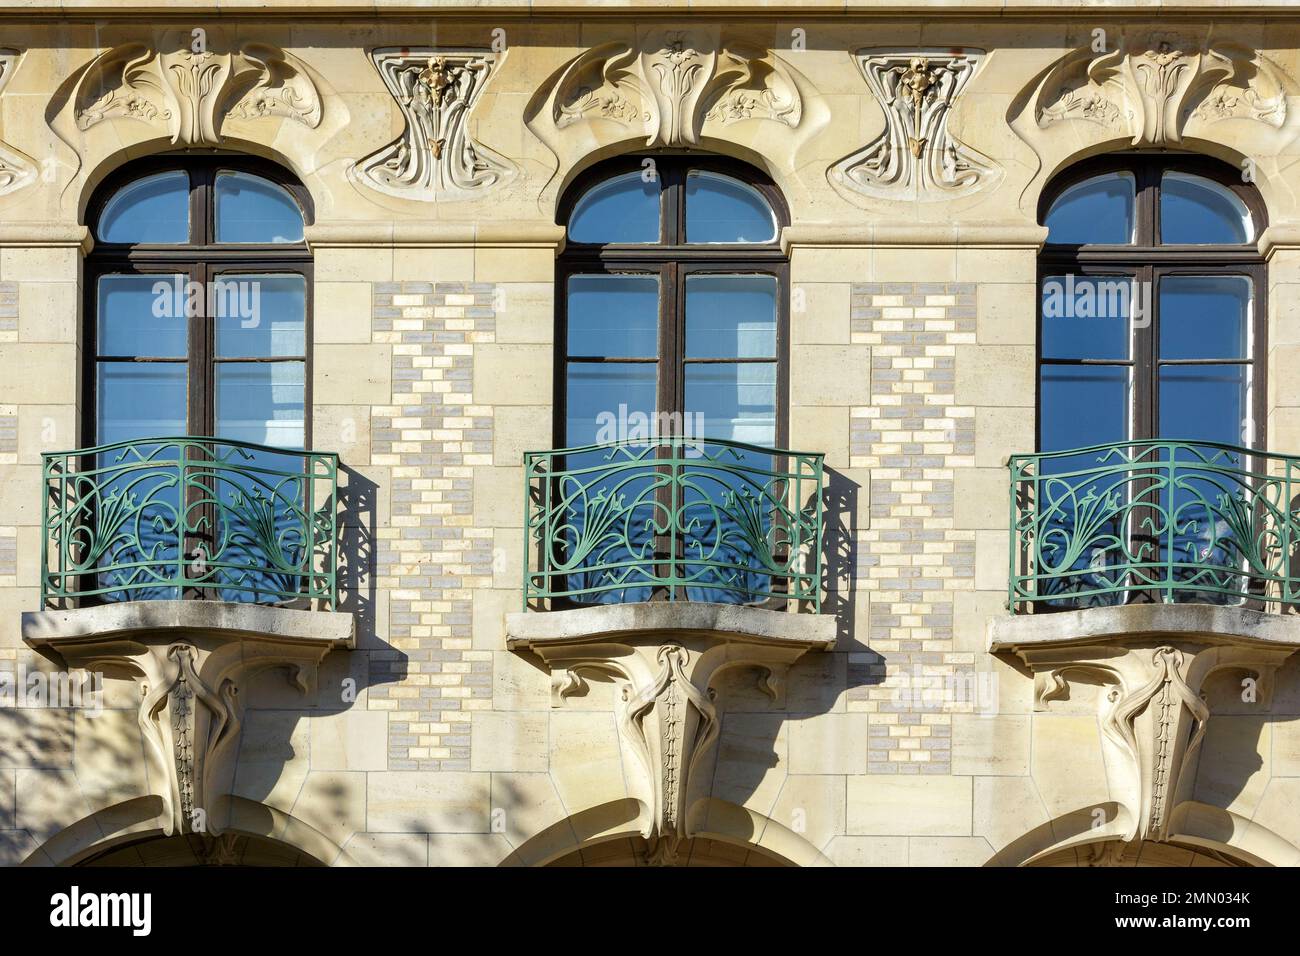 France, Meurthe et Moselle, Nancy, detail of the facade of the Victor Luc house, a mansion in Art Nouveau style built between 1901 and 1903 by architect Jacques Rene Hermant for Victor Luc who used to run a tannery and a leather tanning plant, ironwork made of wrought iron of the window railings by Louis Majorelle, frieze representing flowers under the cornice by ceramists Gentil and Bourdet located Rue de Malzeville Stock Photo